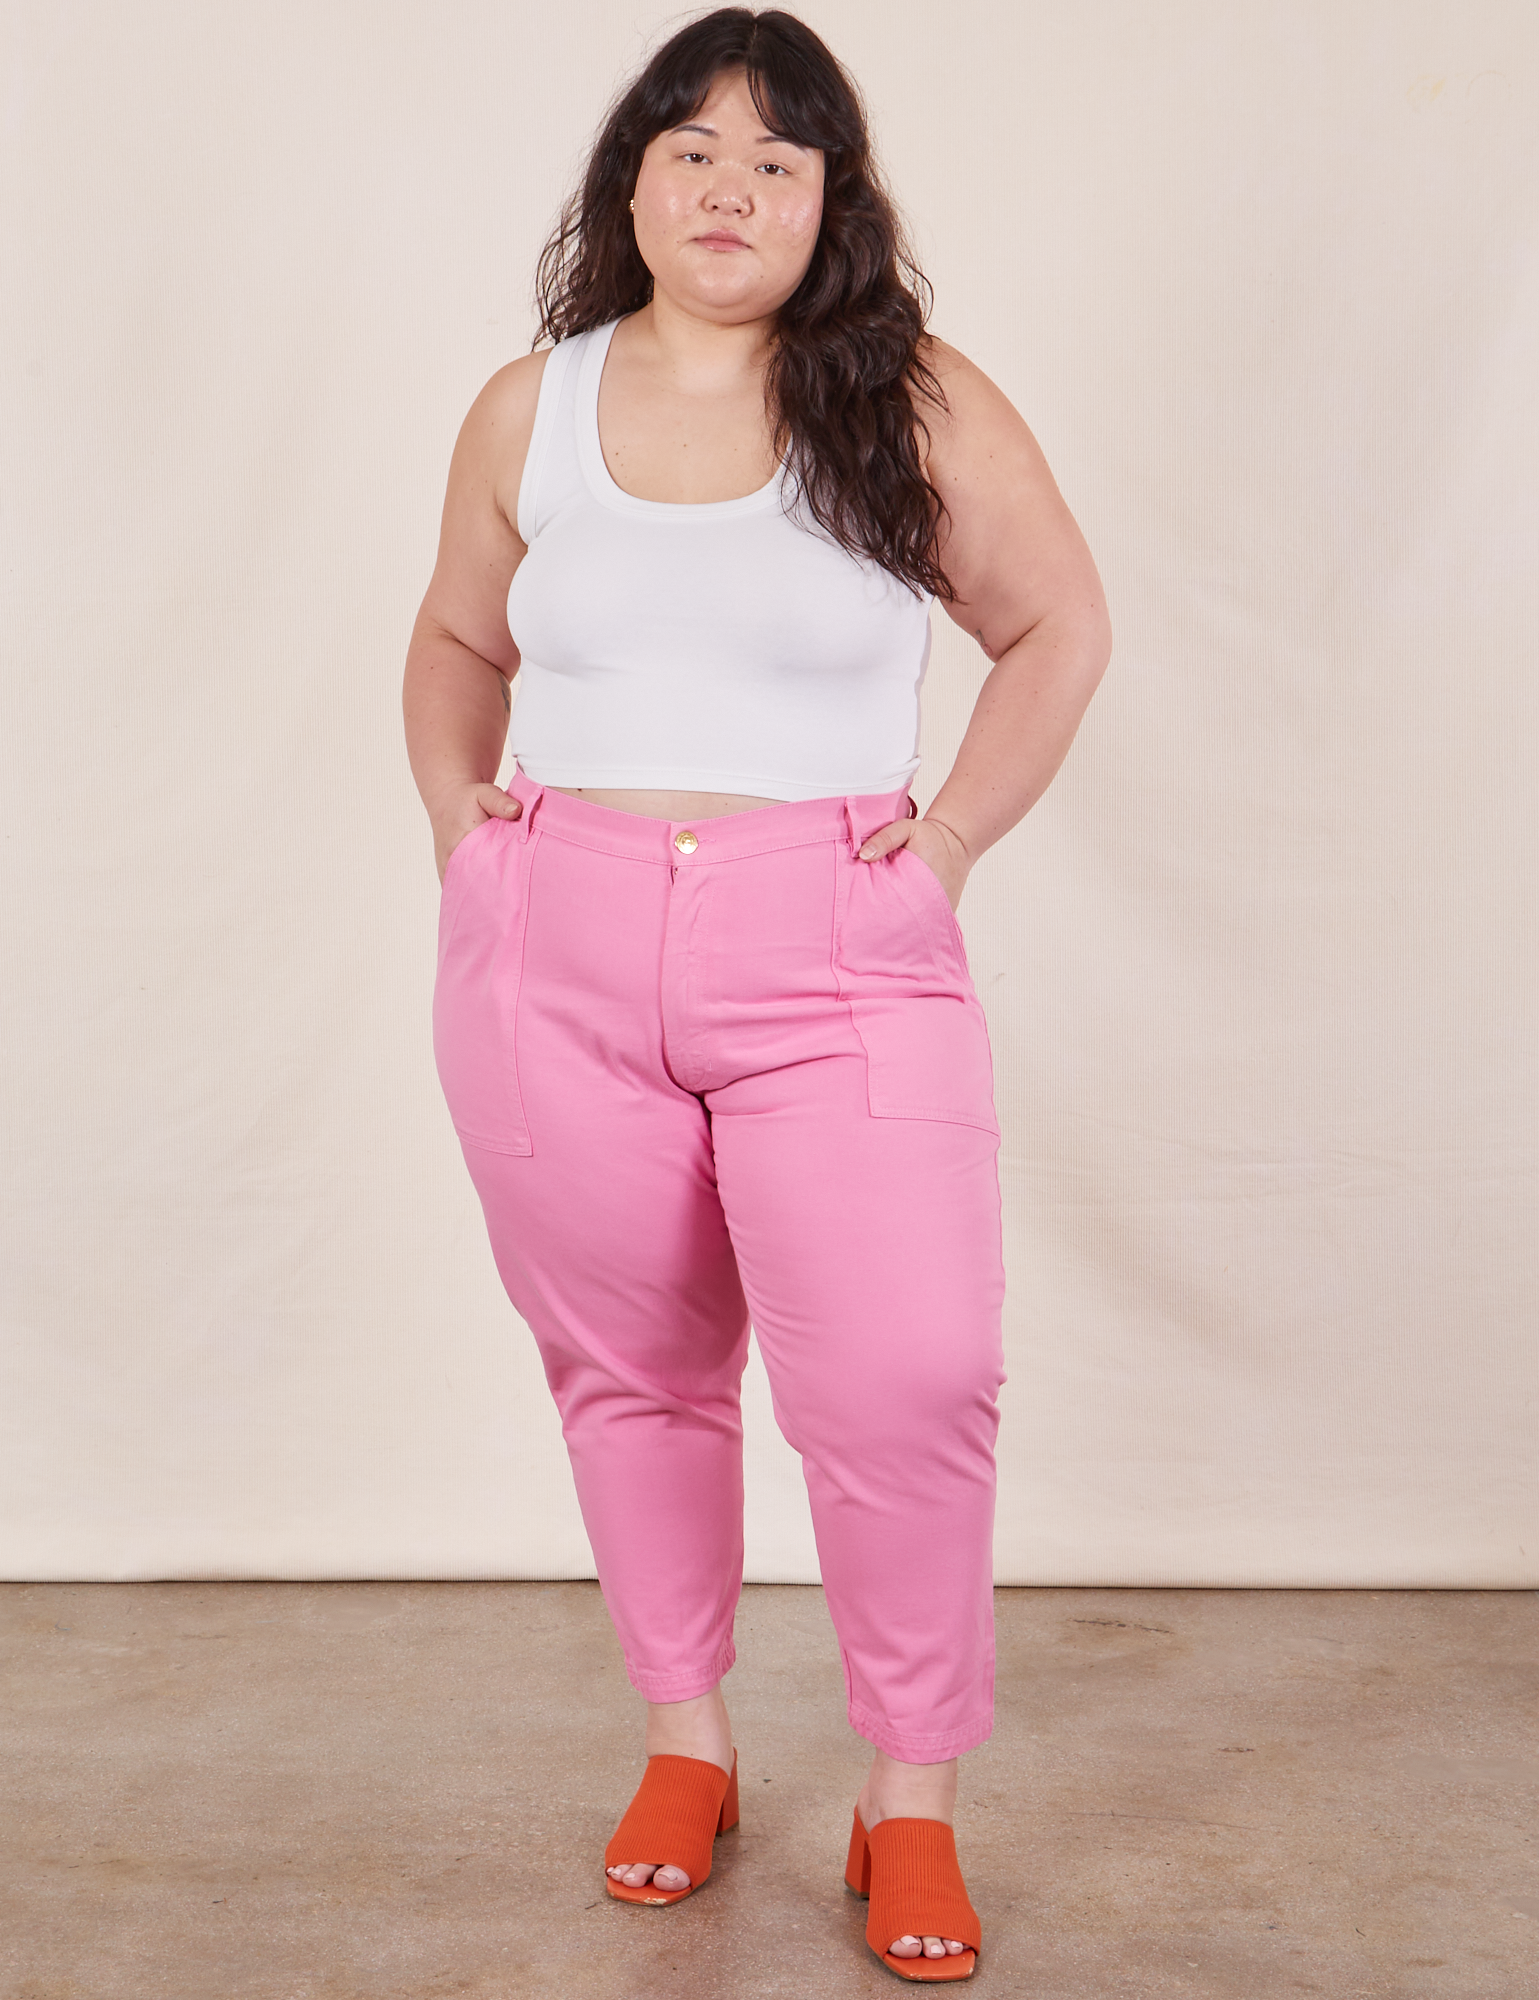 Ashley is wearing Petite Pencil Pants in Bubblegum Pink and vintage off-white Cropped Tank Top